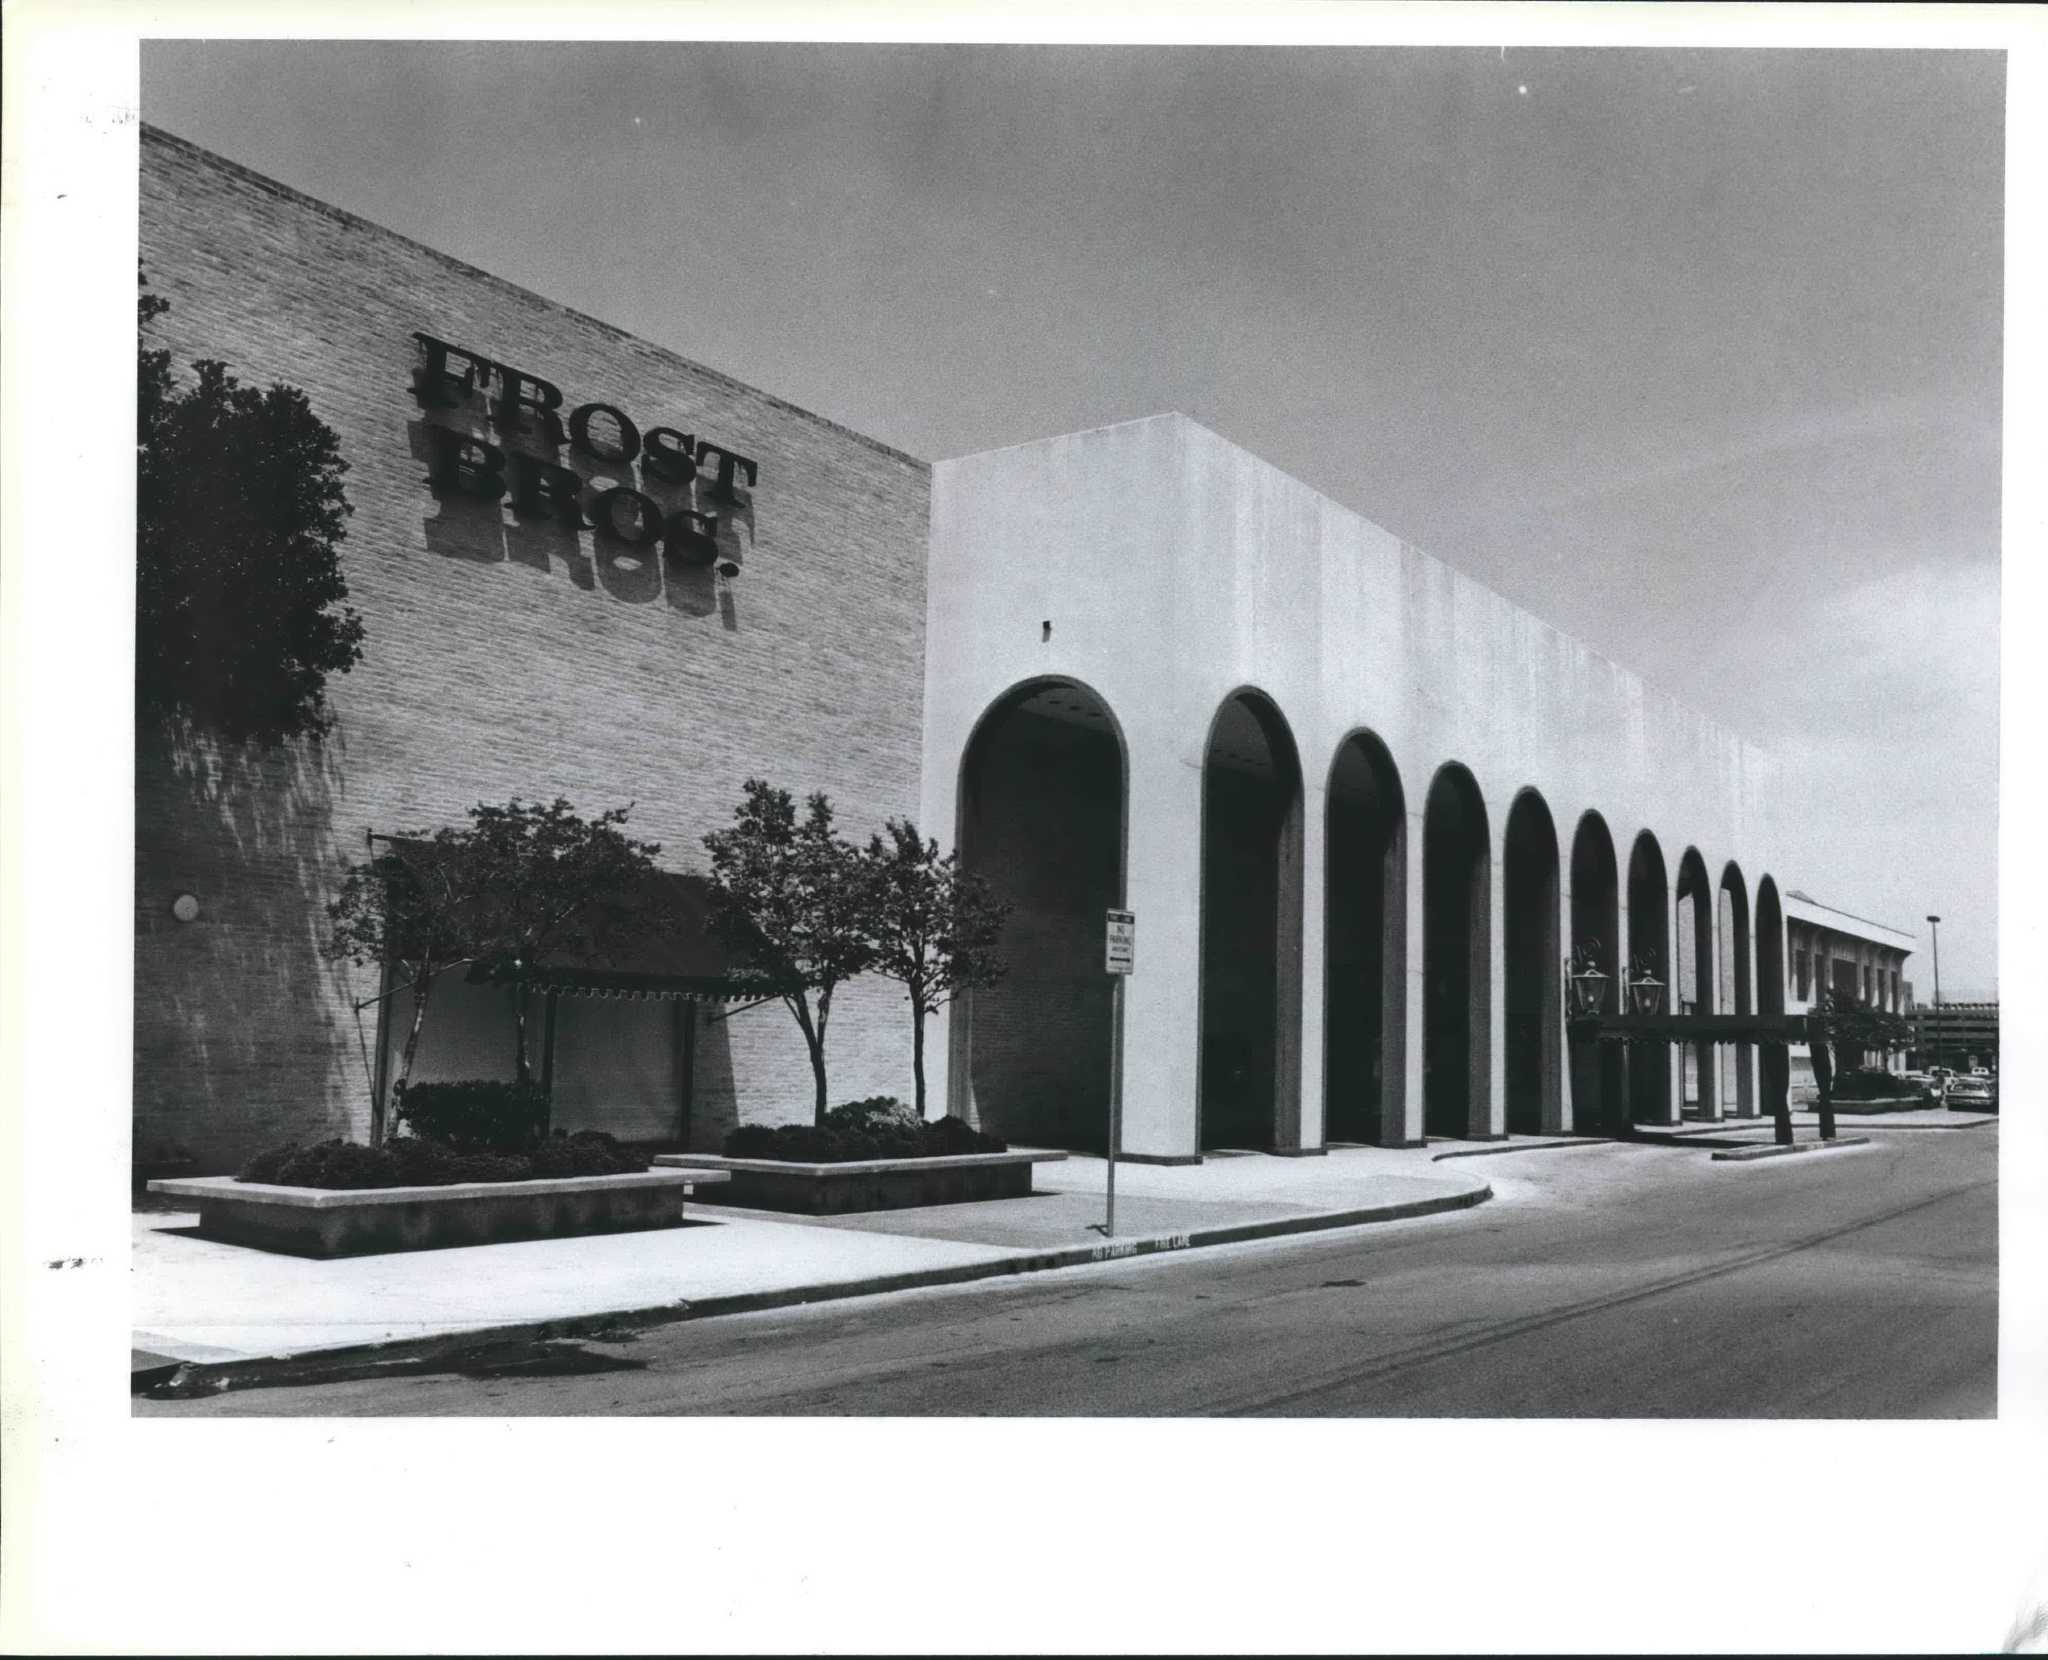 Vintage San Antonio - a photo history - North Star Mall under construction  - It opened in 1960. Look how empty everything looks north and west of San  Pedro & 410. Of